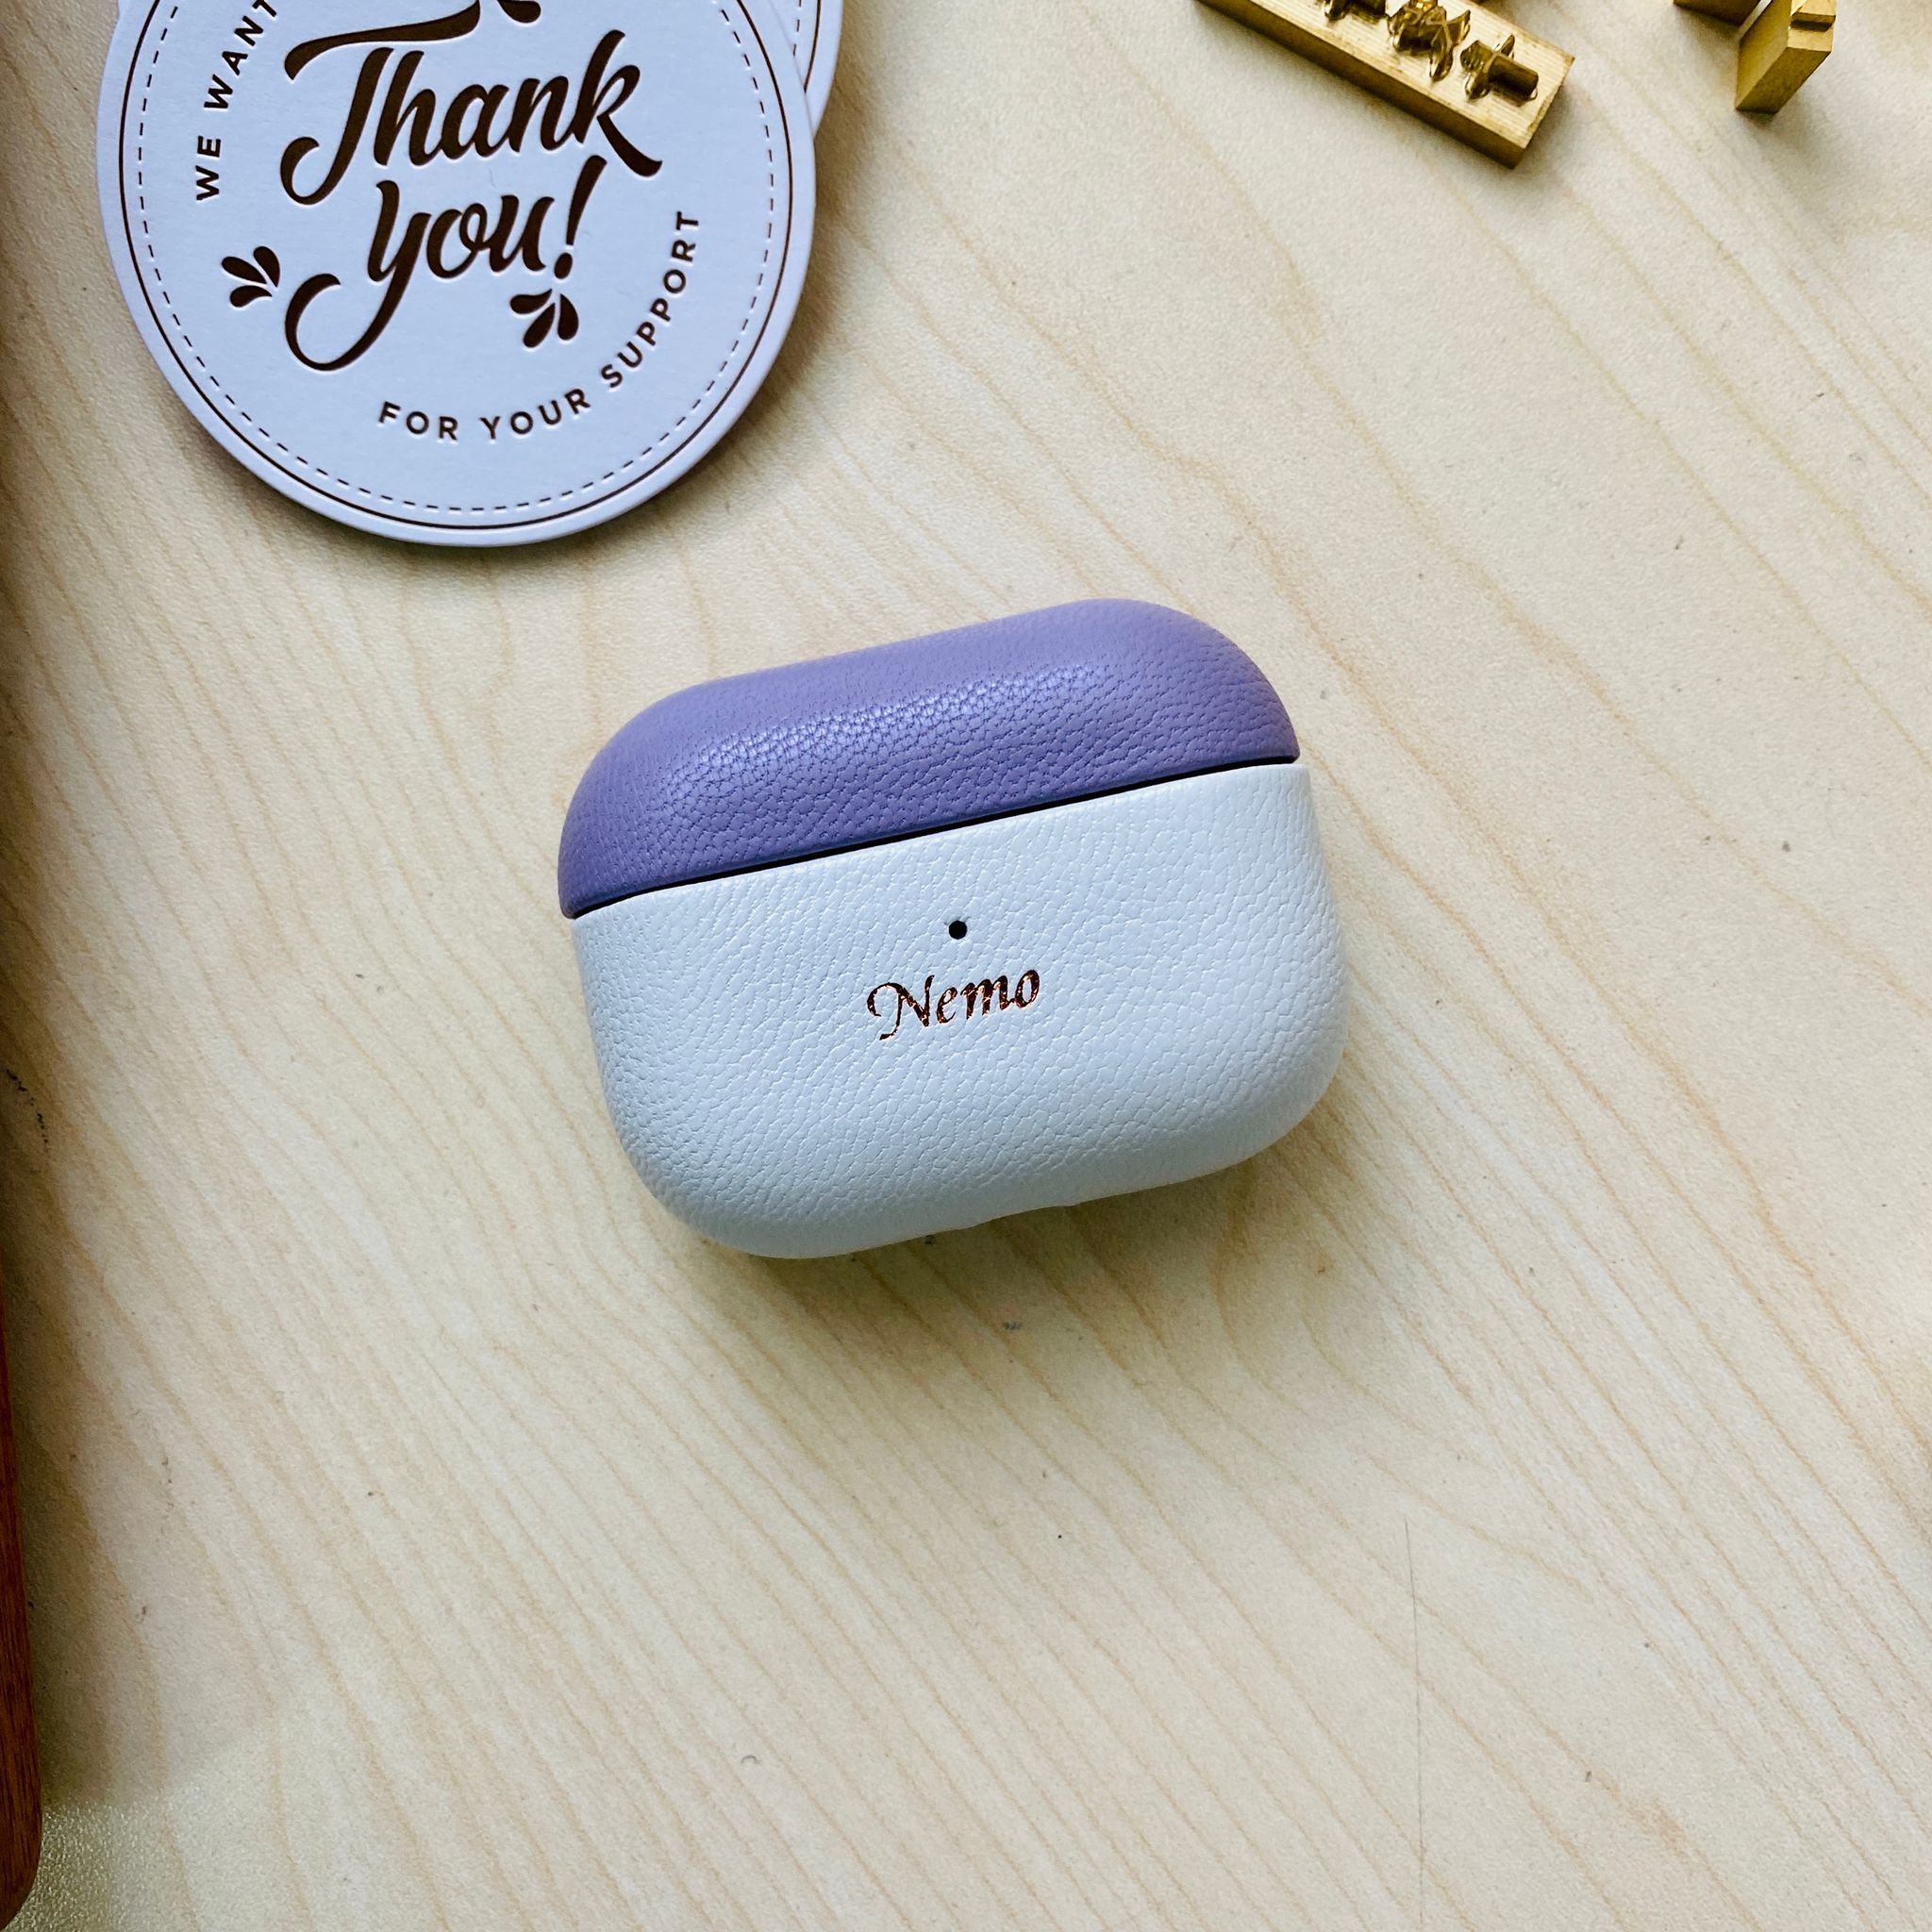 Personalized Leather AirPod Case with gold printed